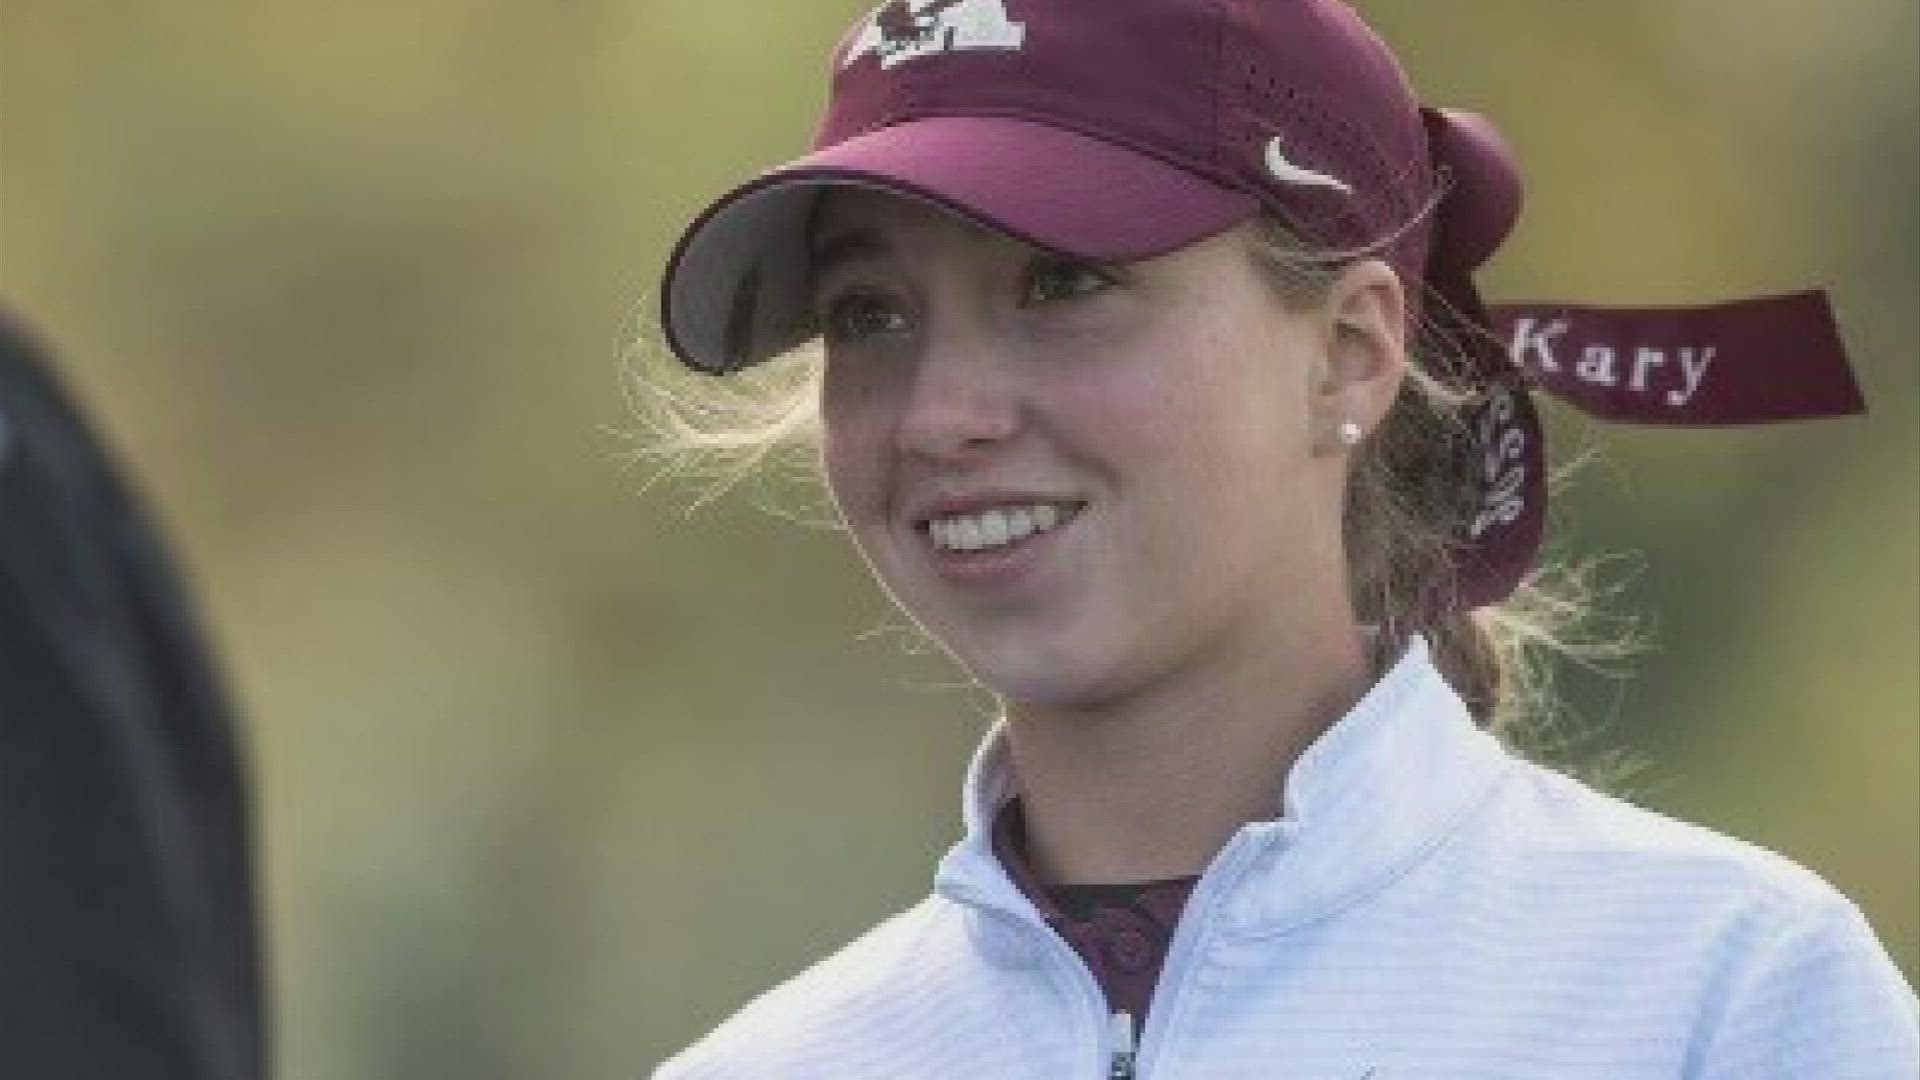 Kary Hollenbaugh plays golf and tennis for New Albany High School and also holds a 4.1 GPA.